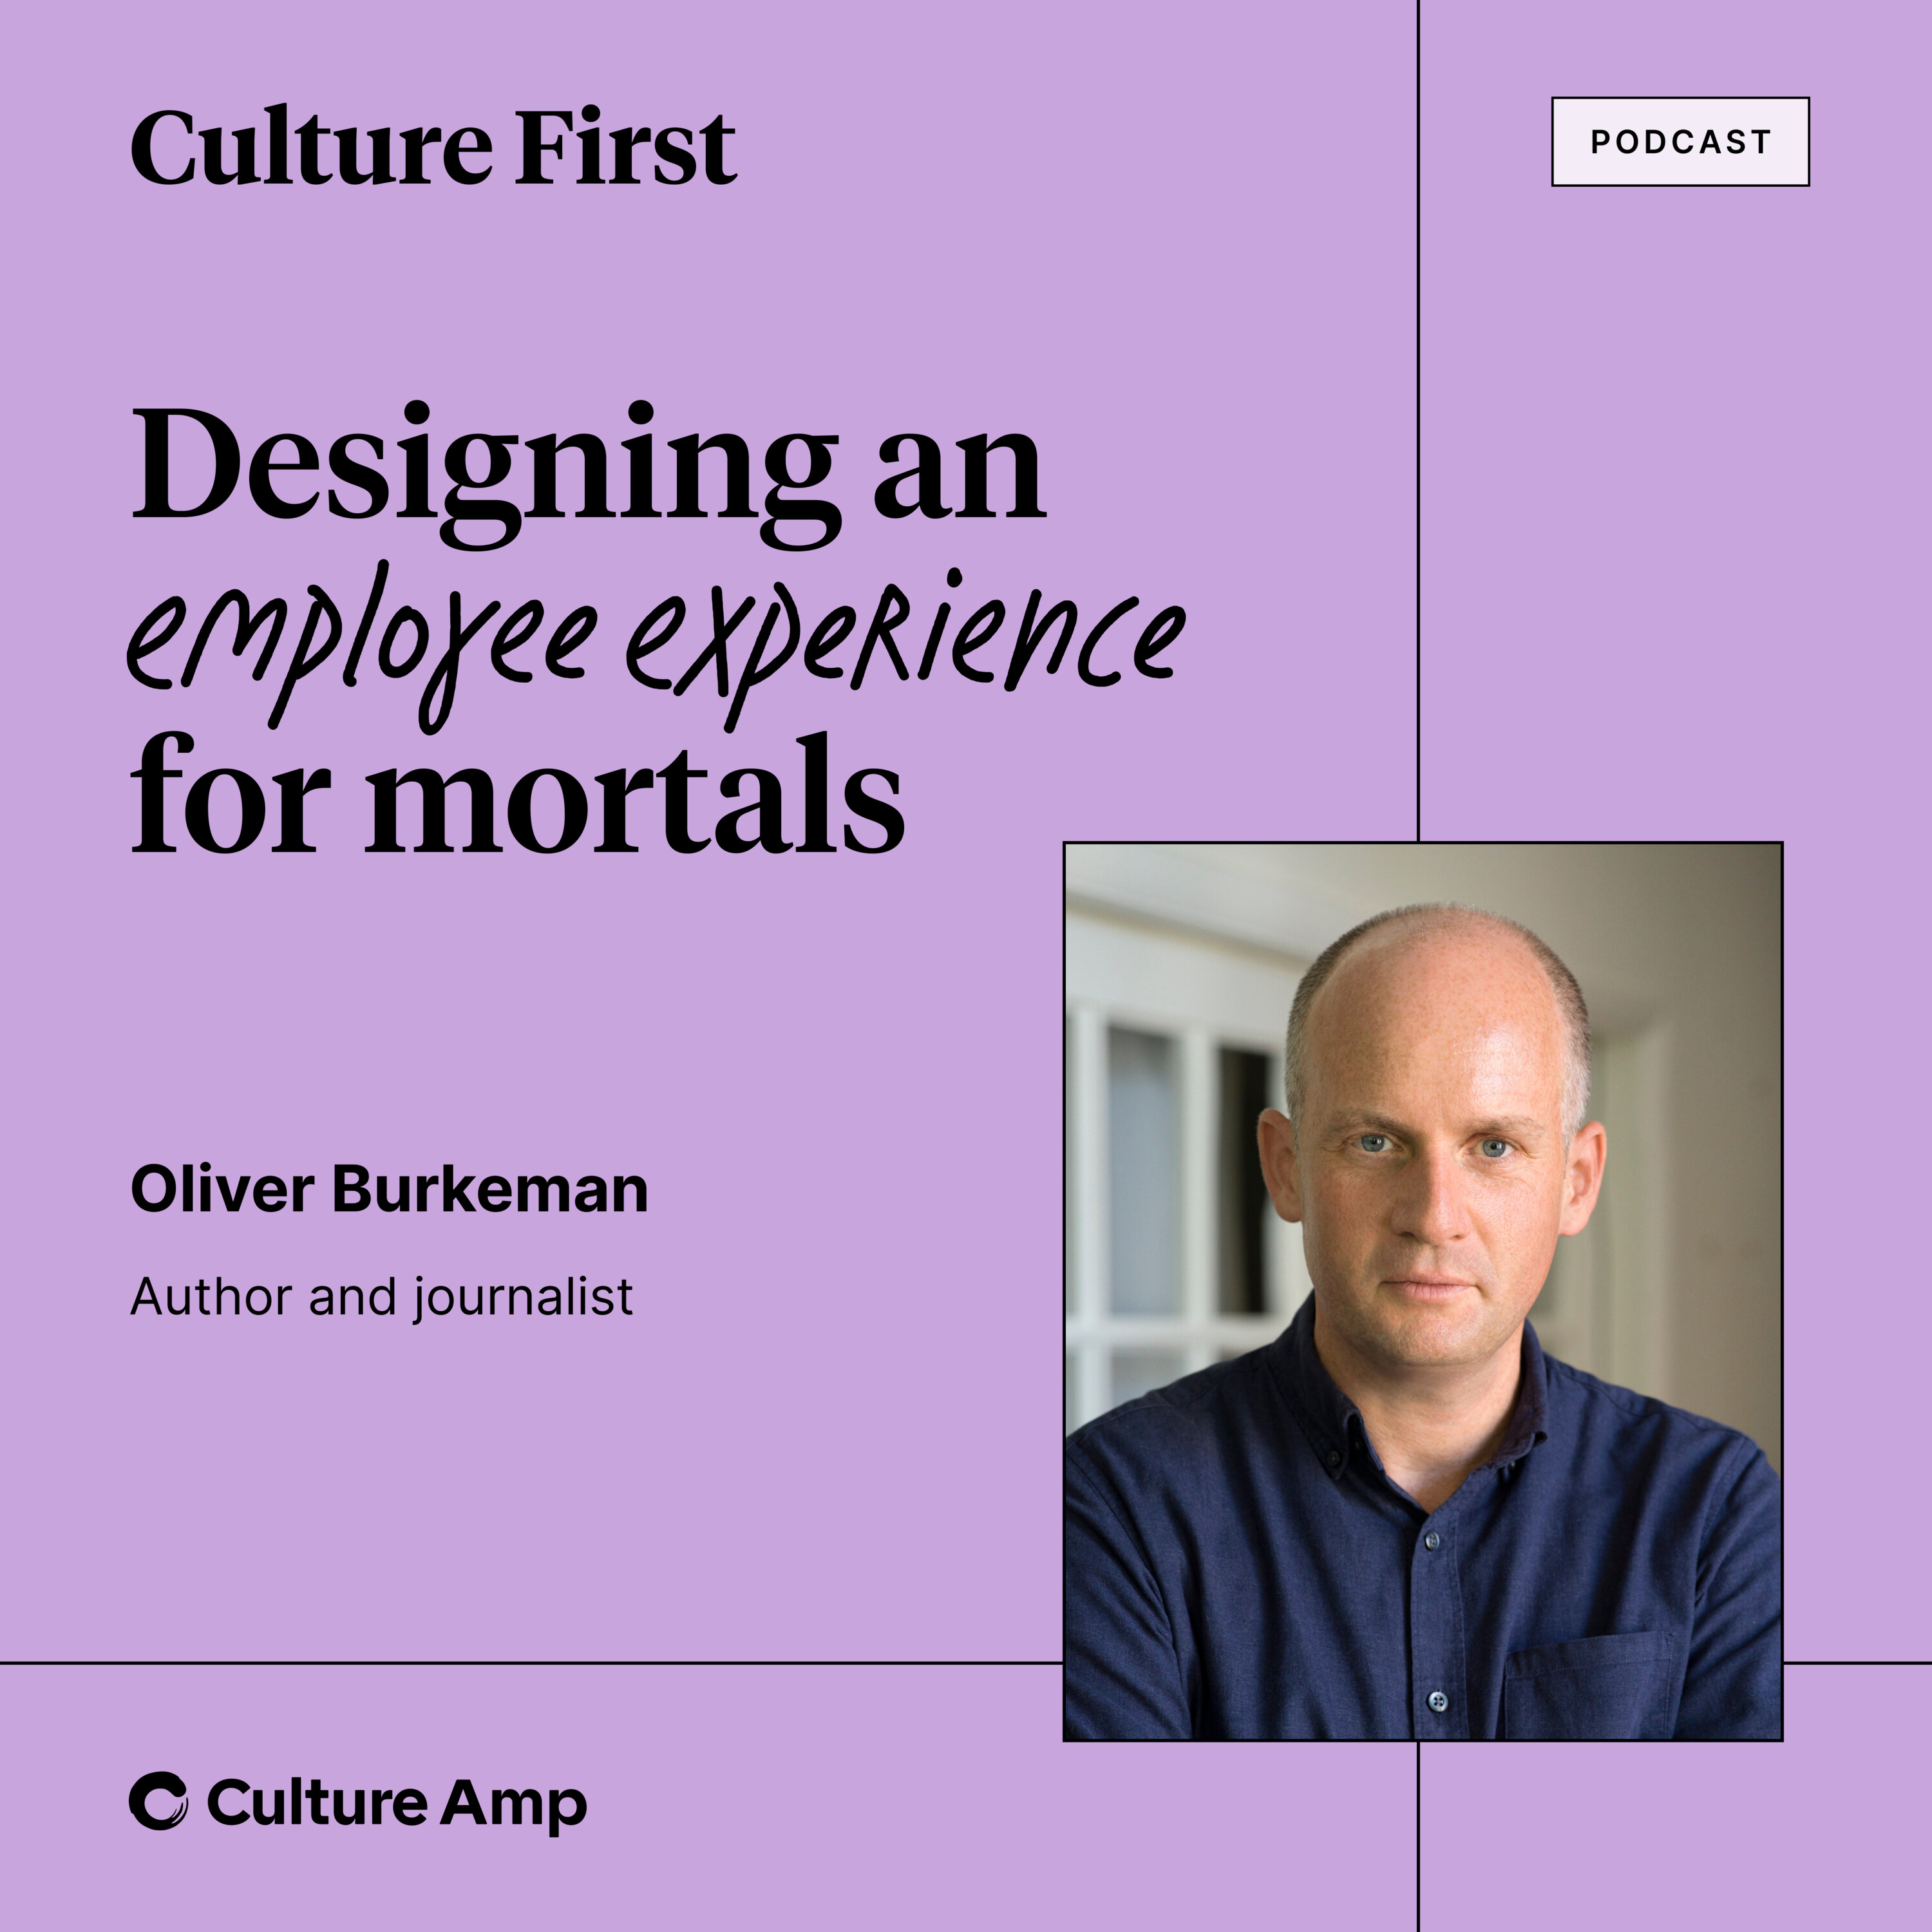 Oliver Burkeman on designing an employee experience for mortals